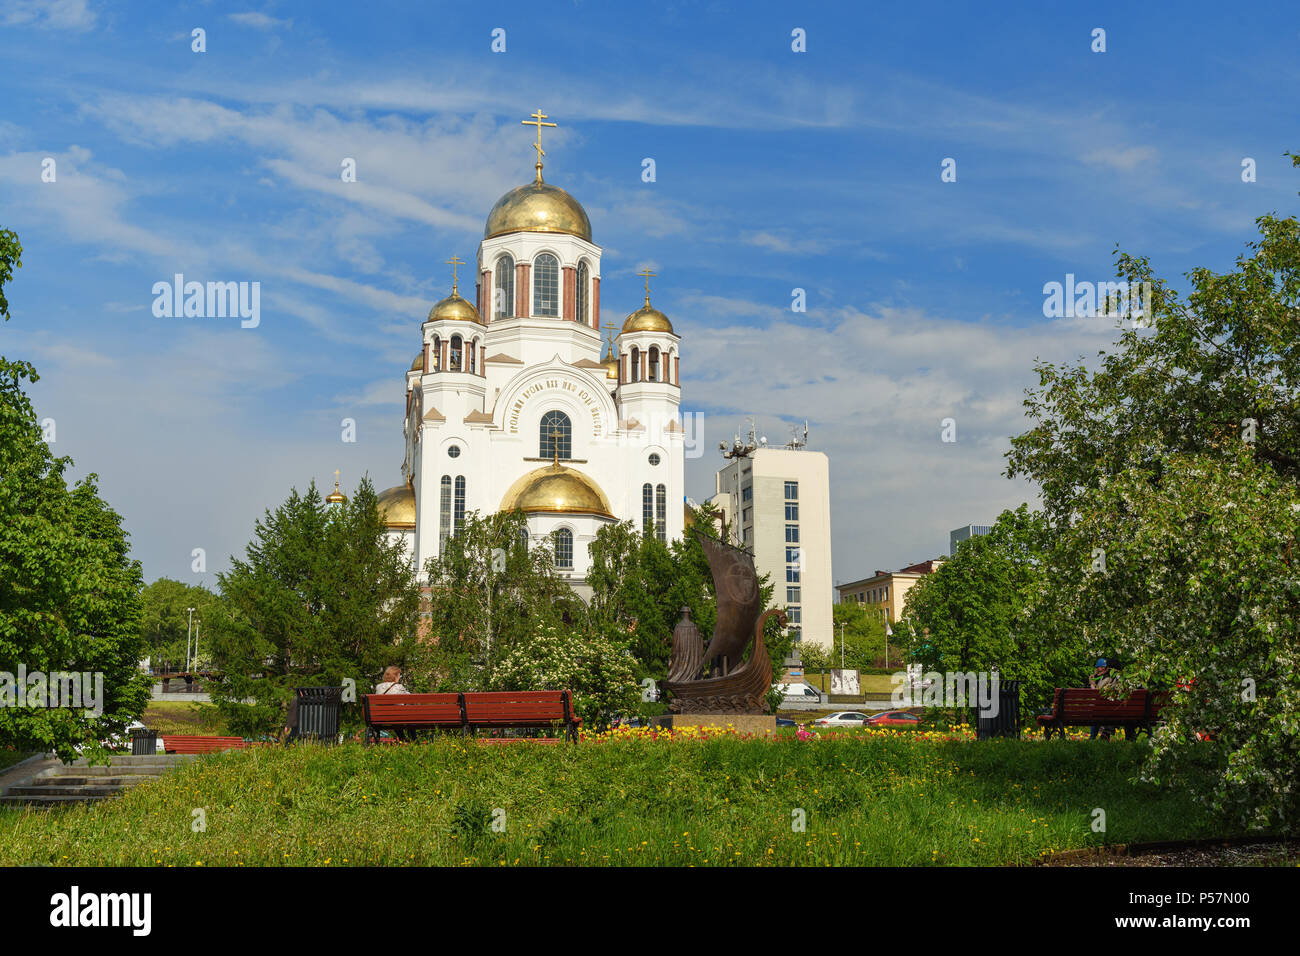 Yekaterinburg, Russia - June 21, 2018: View of Church on Blood in Honour of All Saints Stock Photo